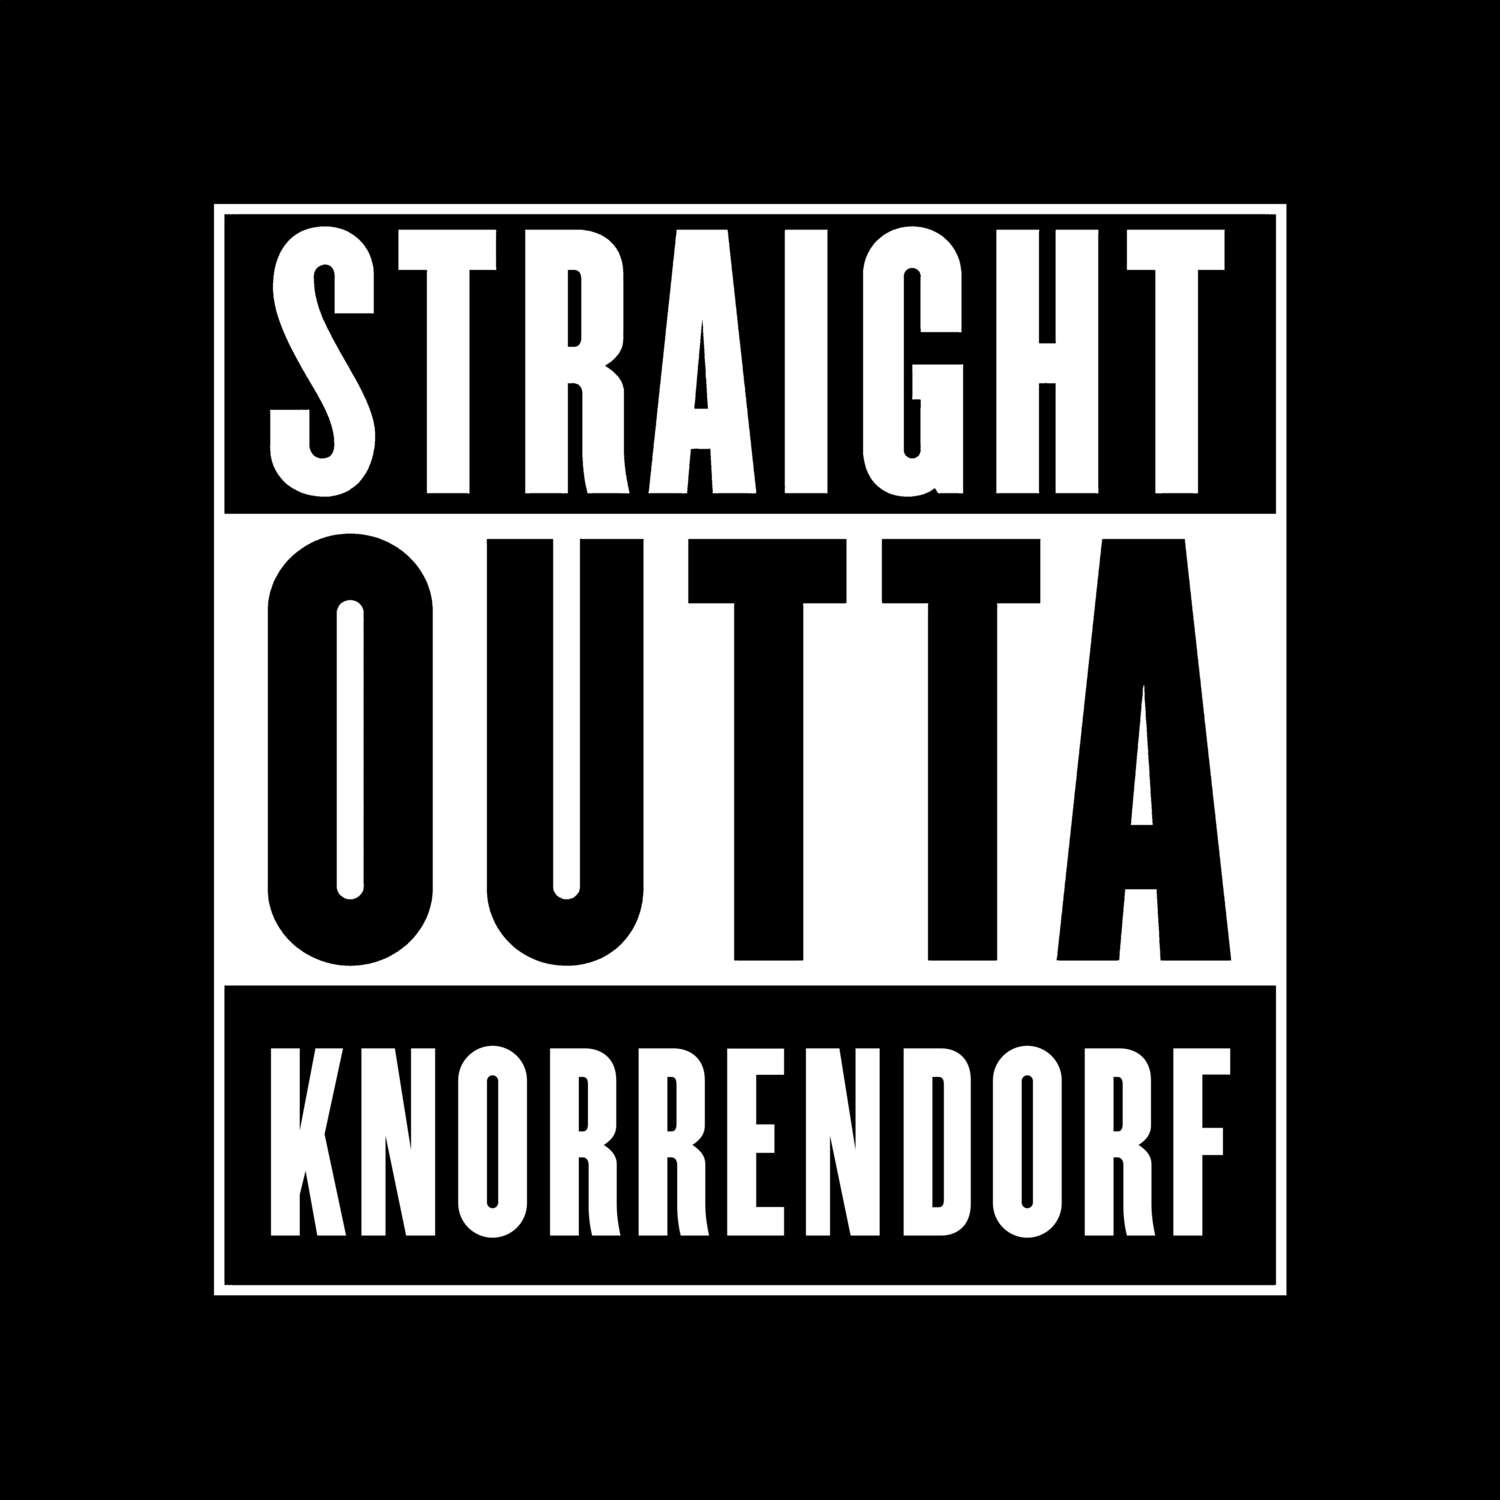 Knorrendorf T-Shirt »Straight Outta«